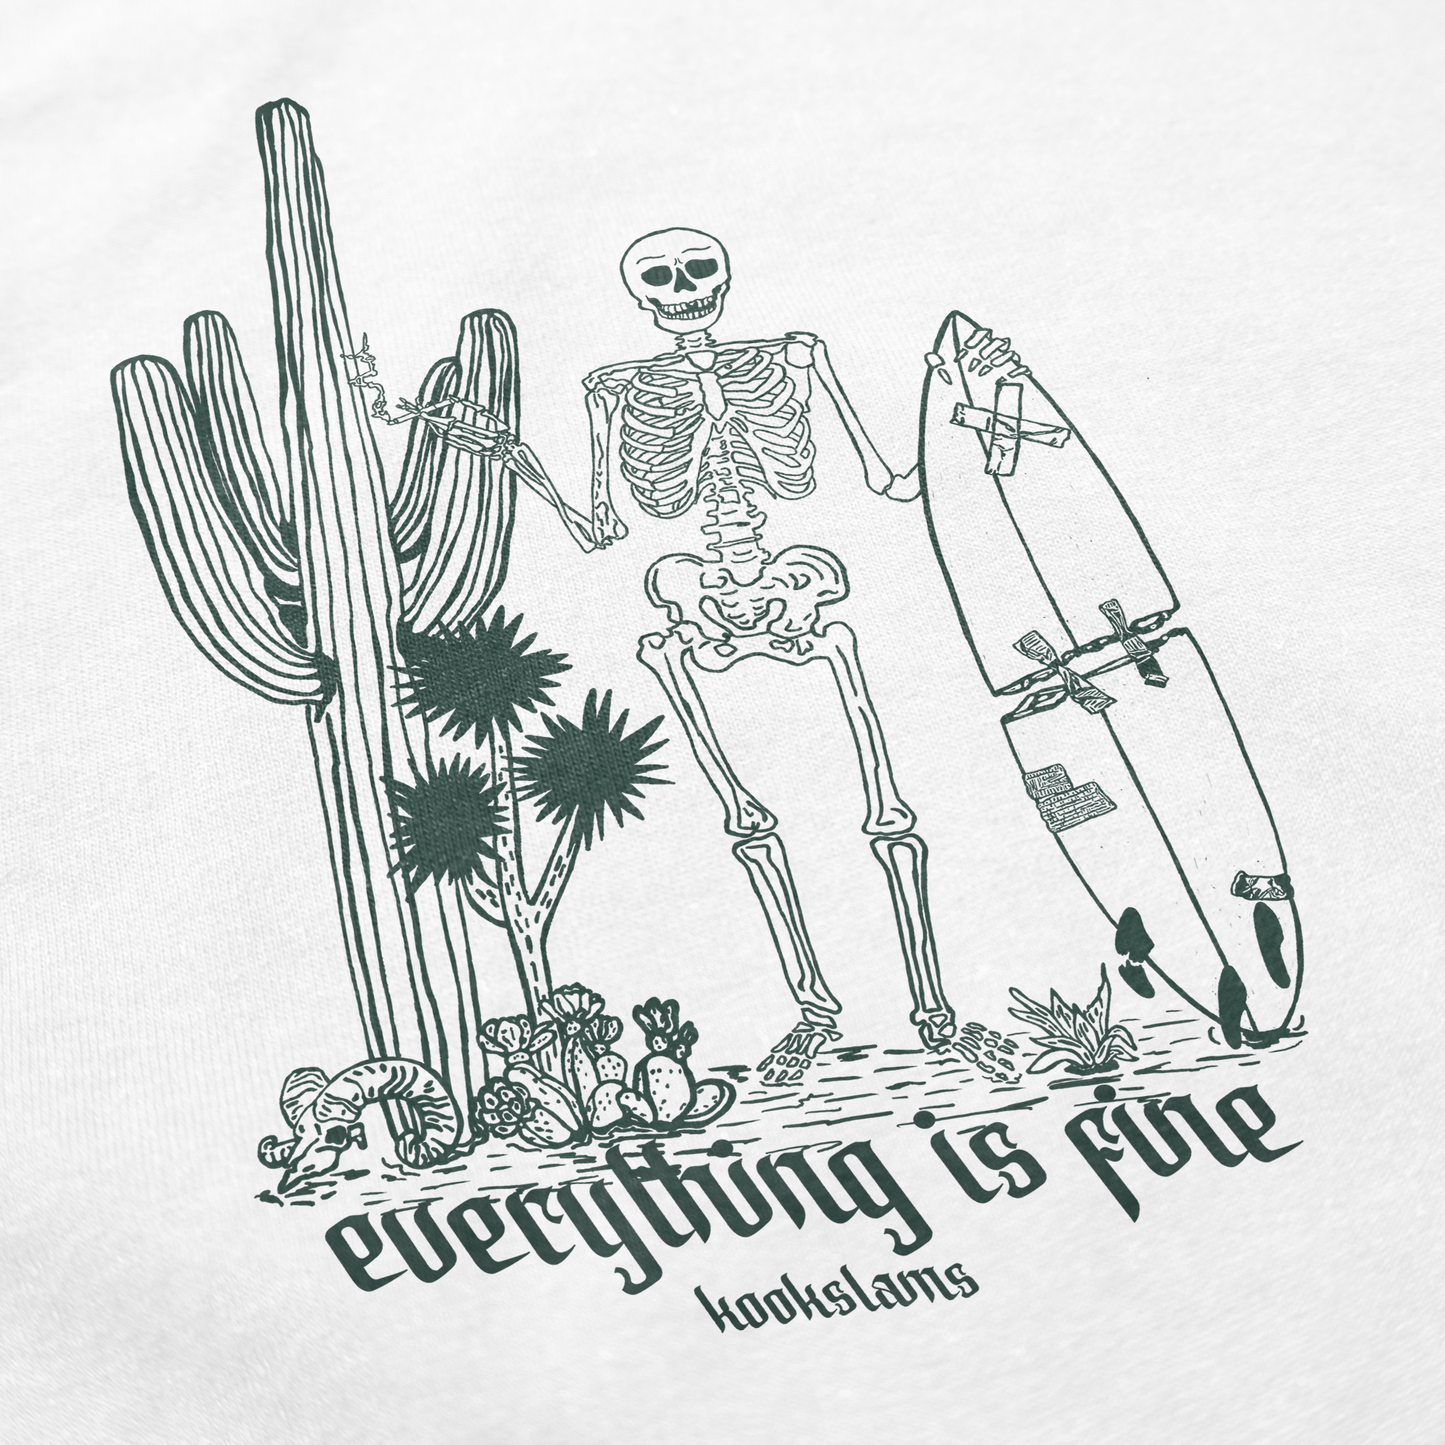 Everything Is Fine T Shirt